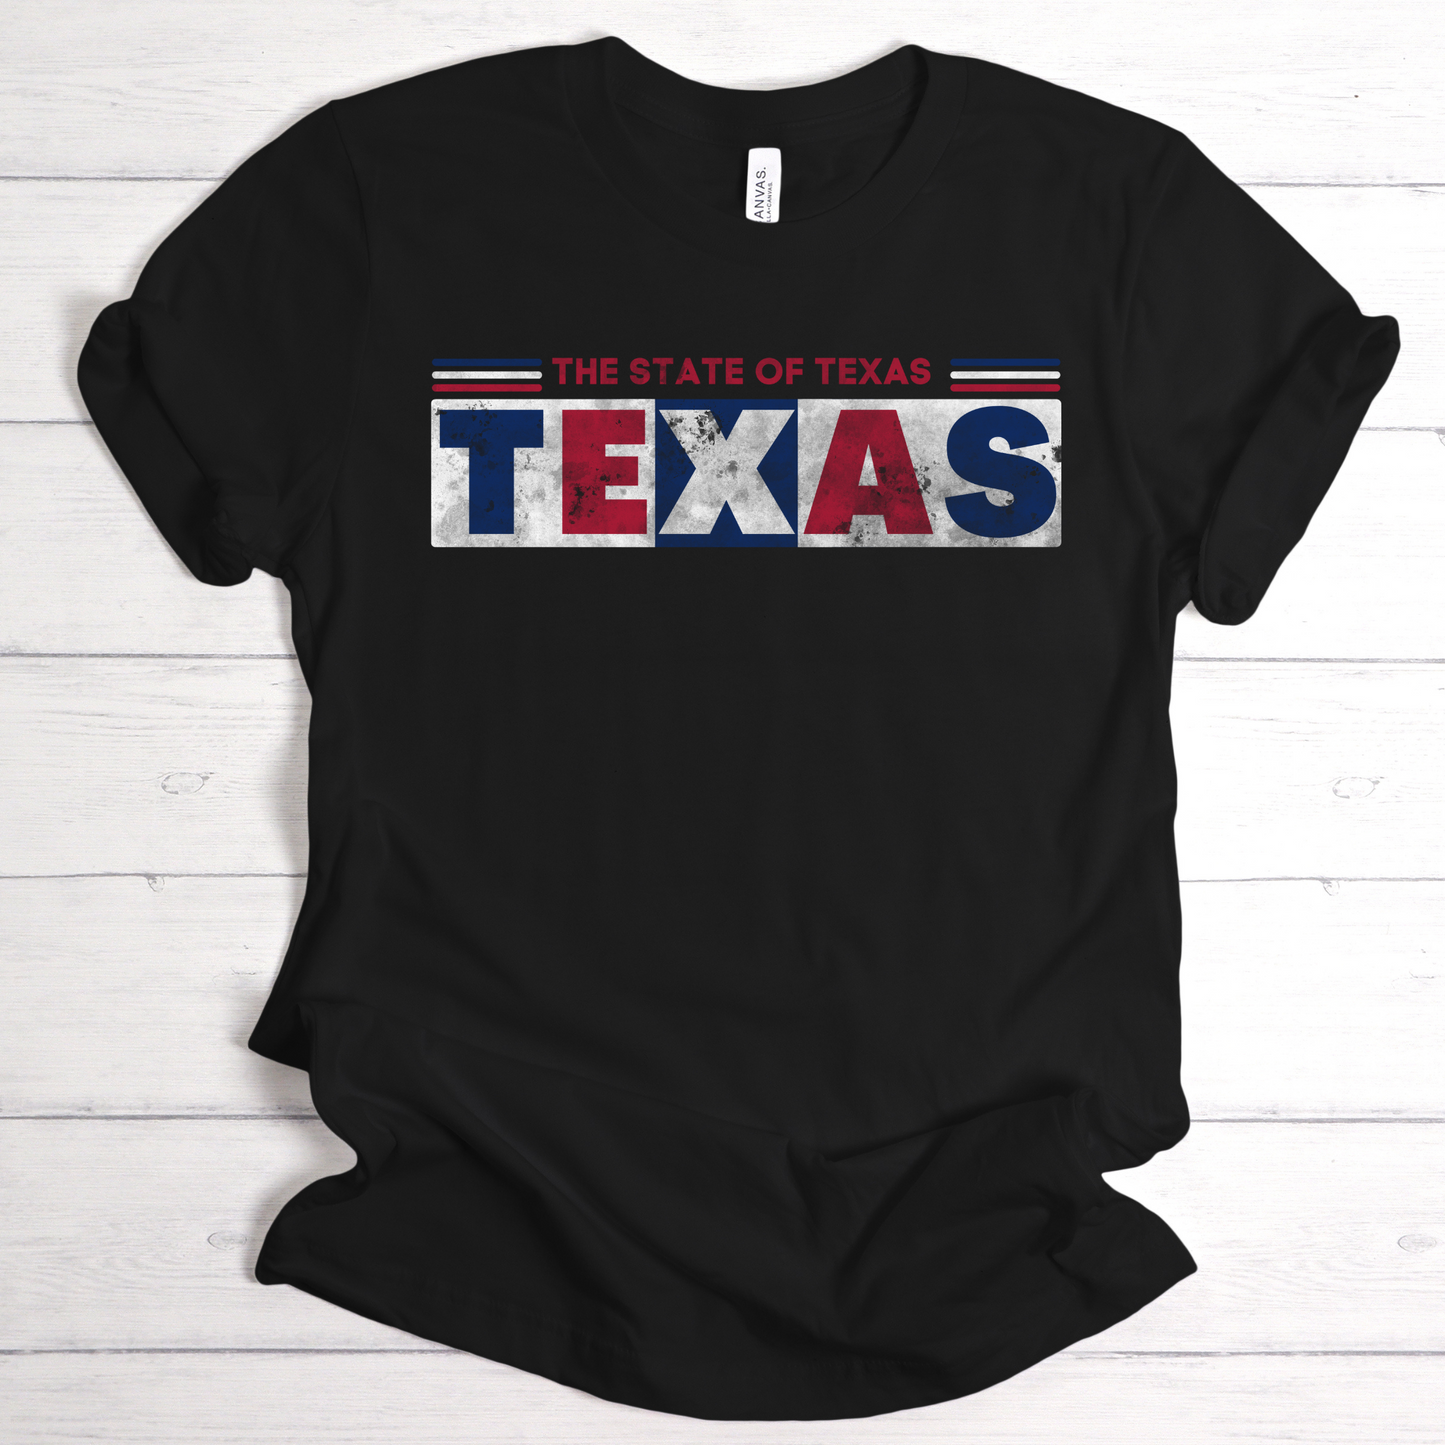 The State of Texas Pride T-Shirt | Stylish Texan Apparel for True Lone Star Spirit